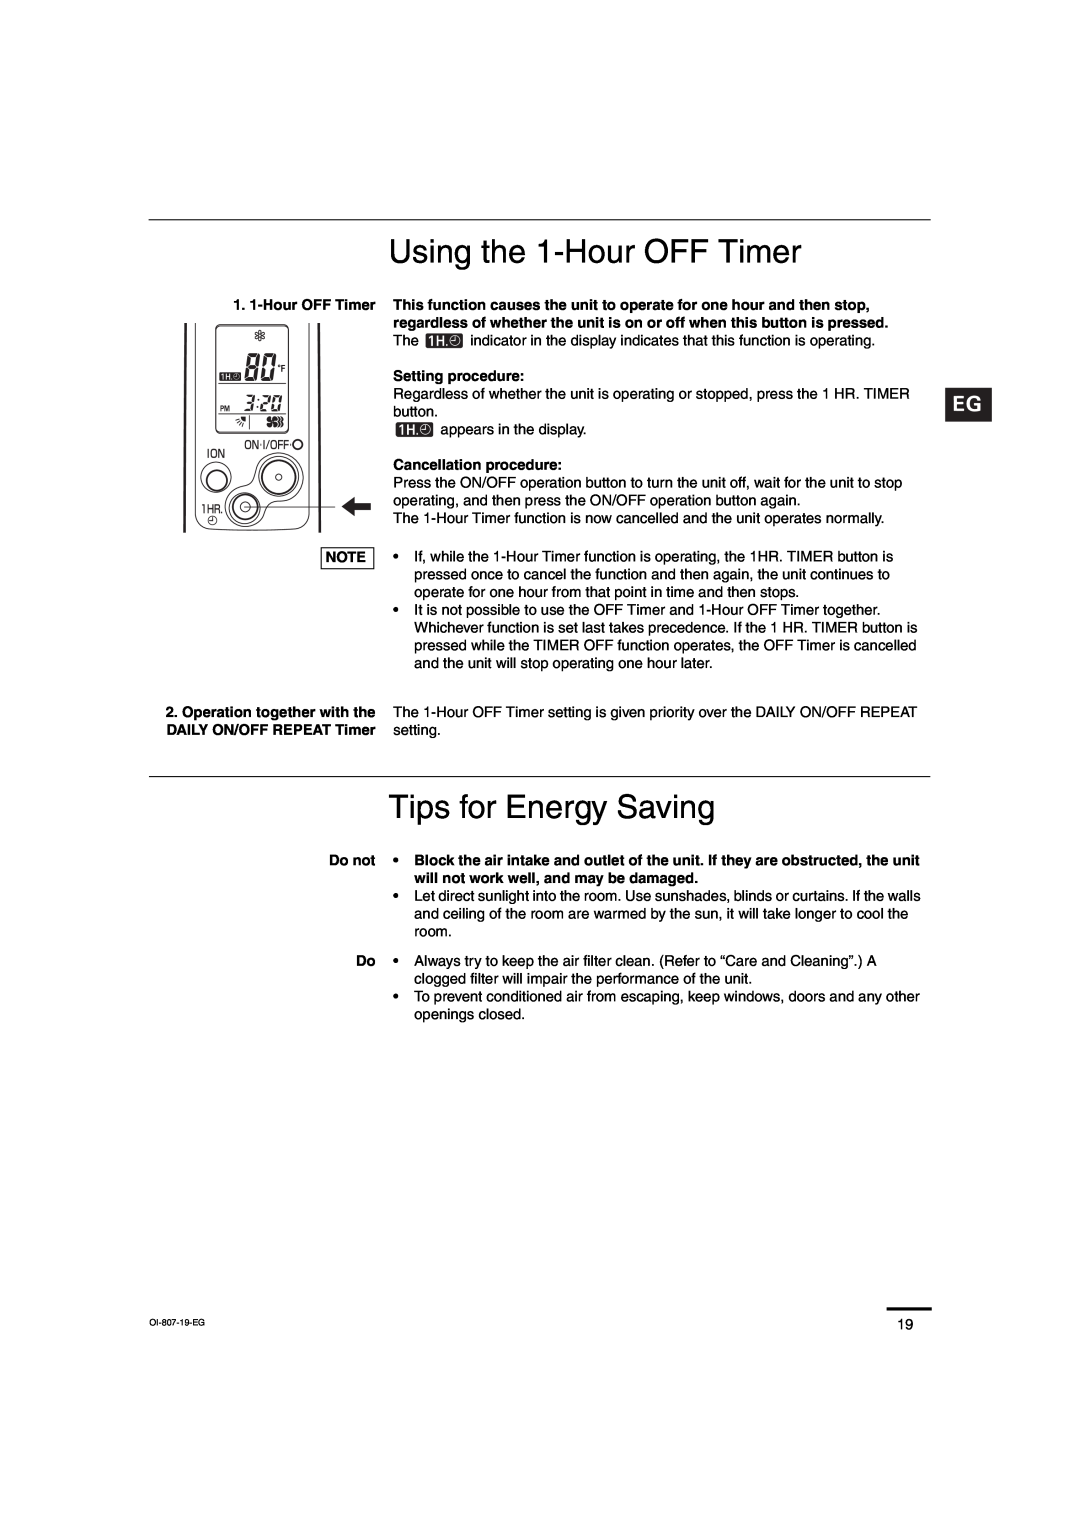 Sanyo KMS1872, KMS2472 service manual Using the 1-HourOFF Timer, Tips for Energy Saving 